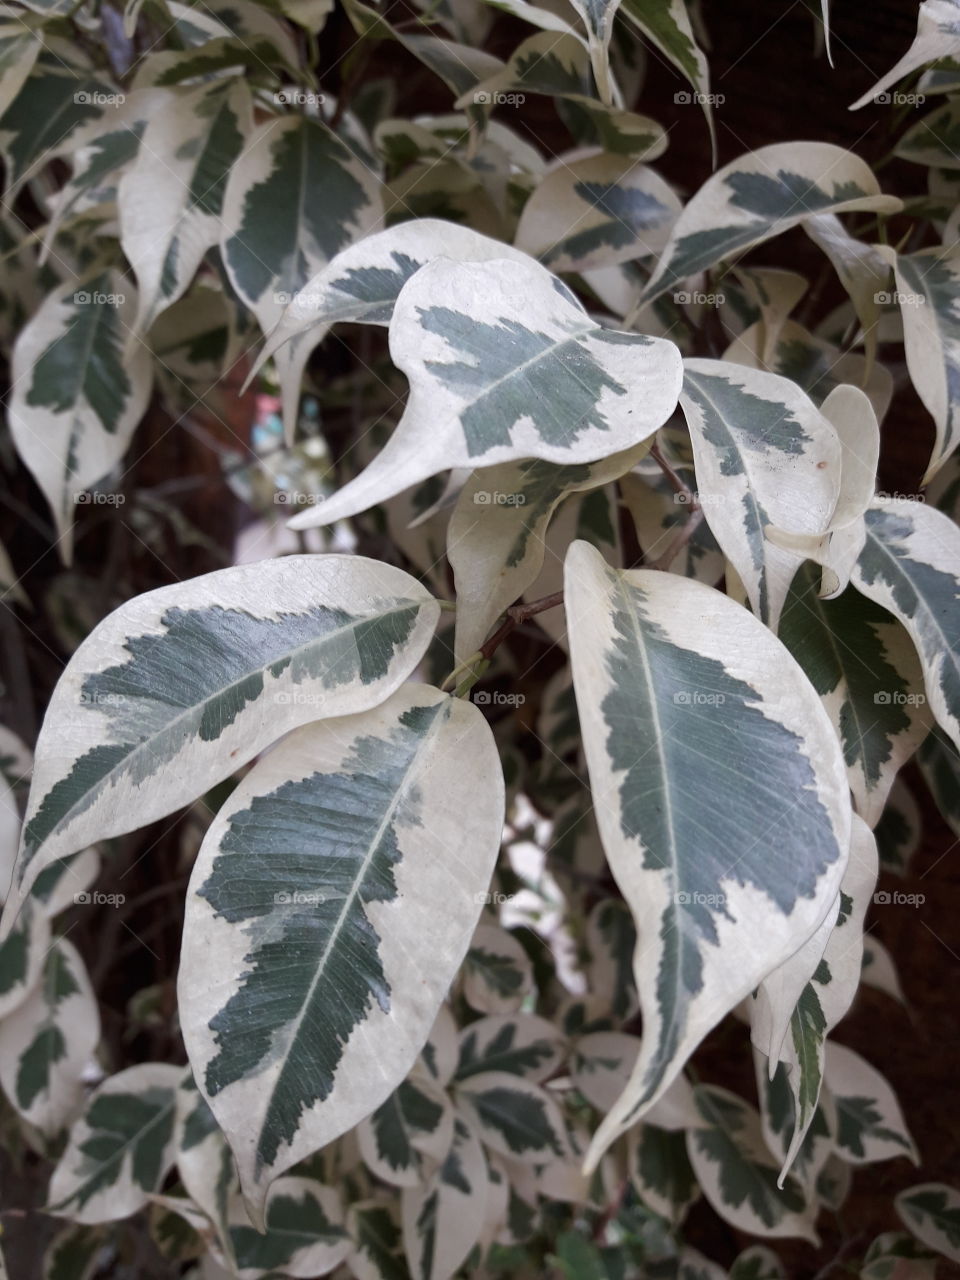 special leafs have sage green and cream color on them. Sage green color are inside of the leafs and cream are outside.